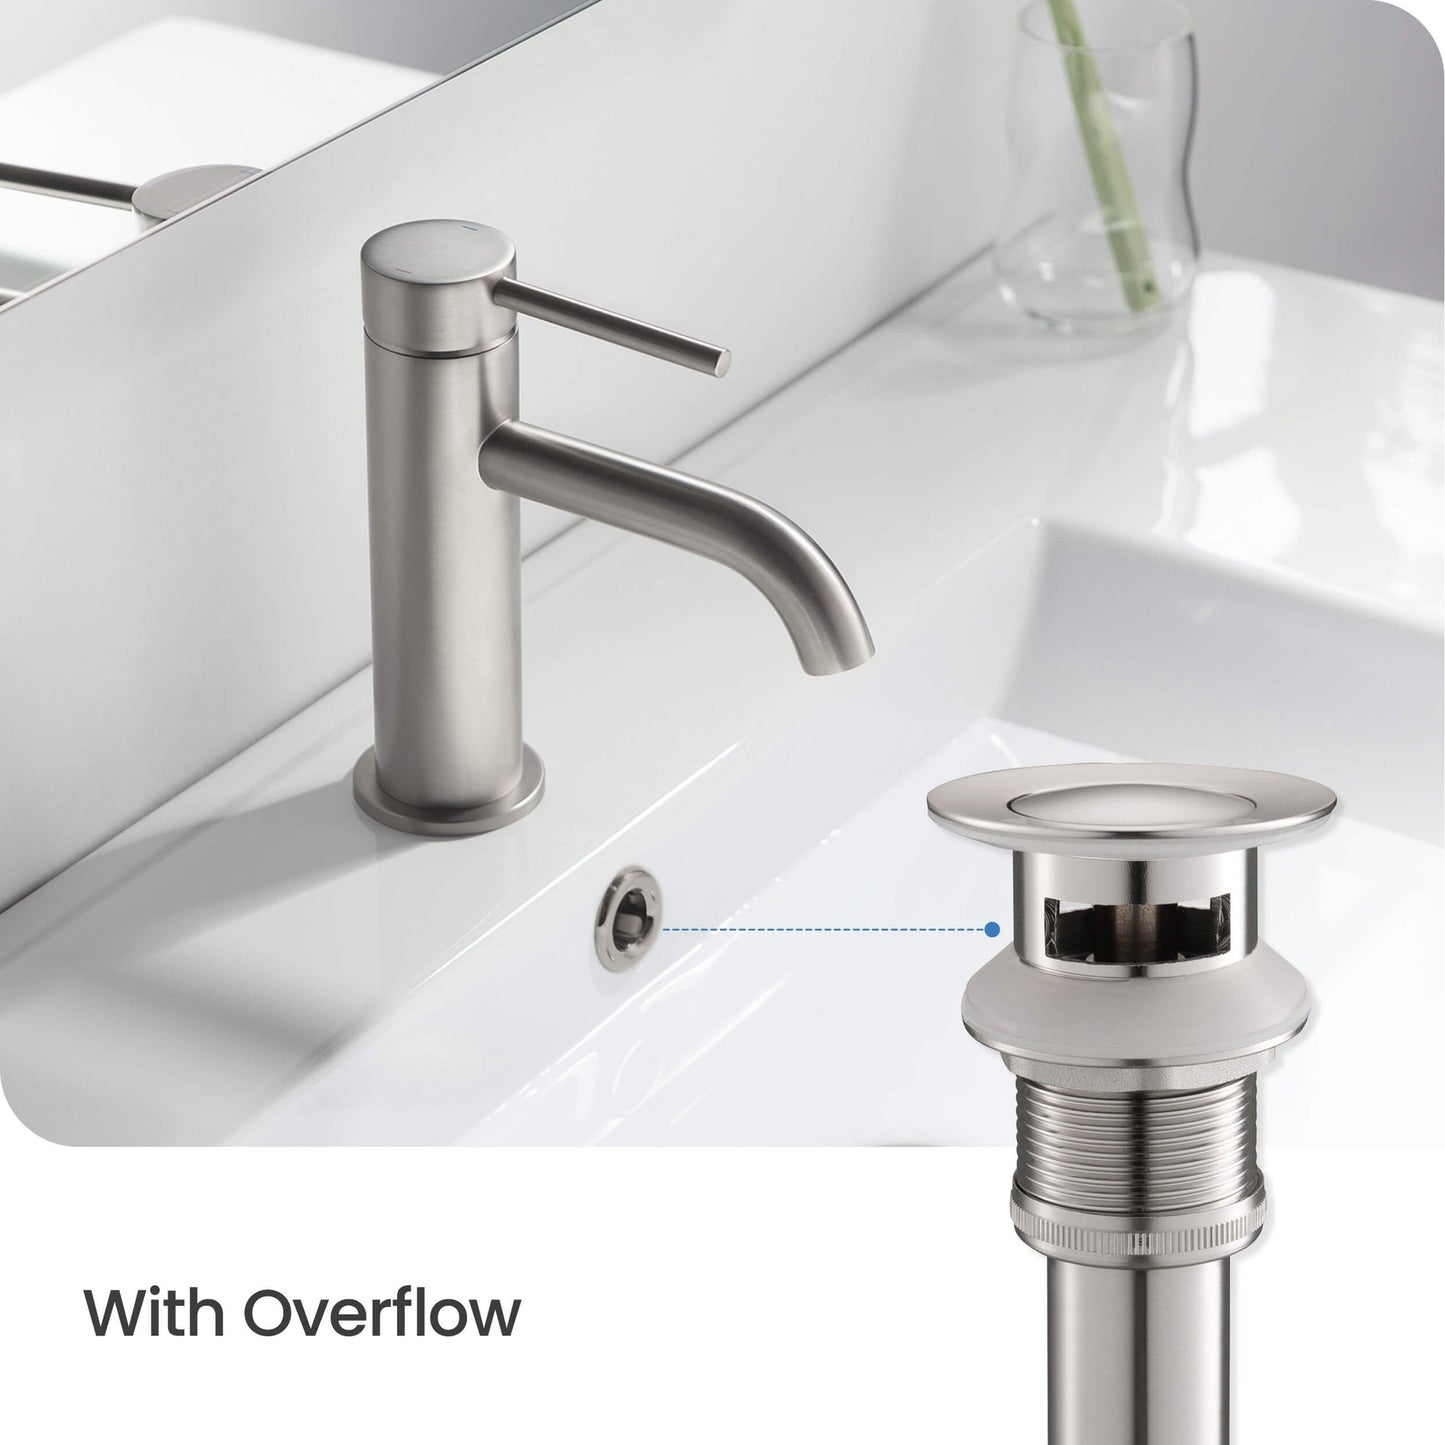 KIBI Harmony Single Handle Brushed Nickel Solid Brass Bathroom Sink Faucet With Pop-Up Drain Stopper Small Cover With Overflow